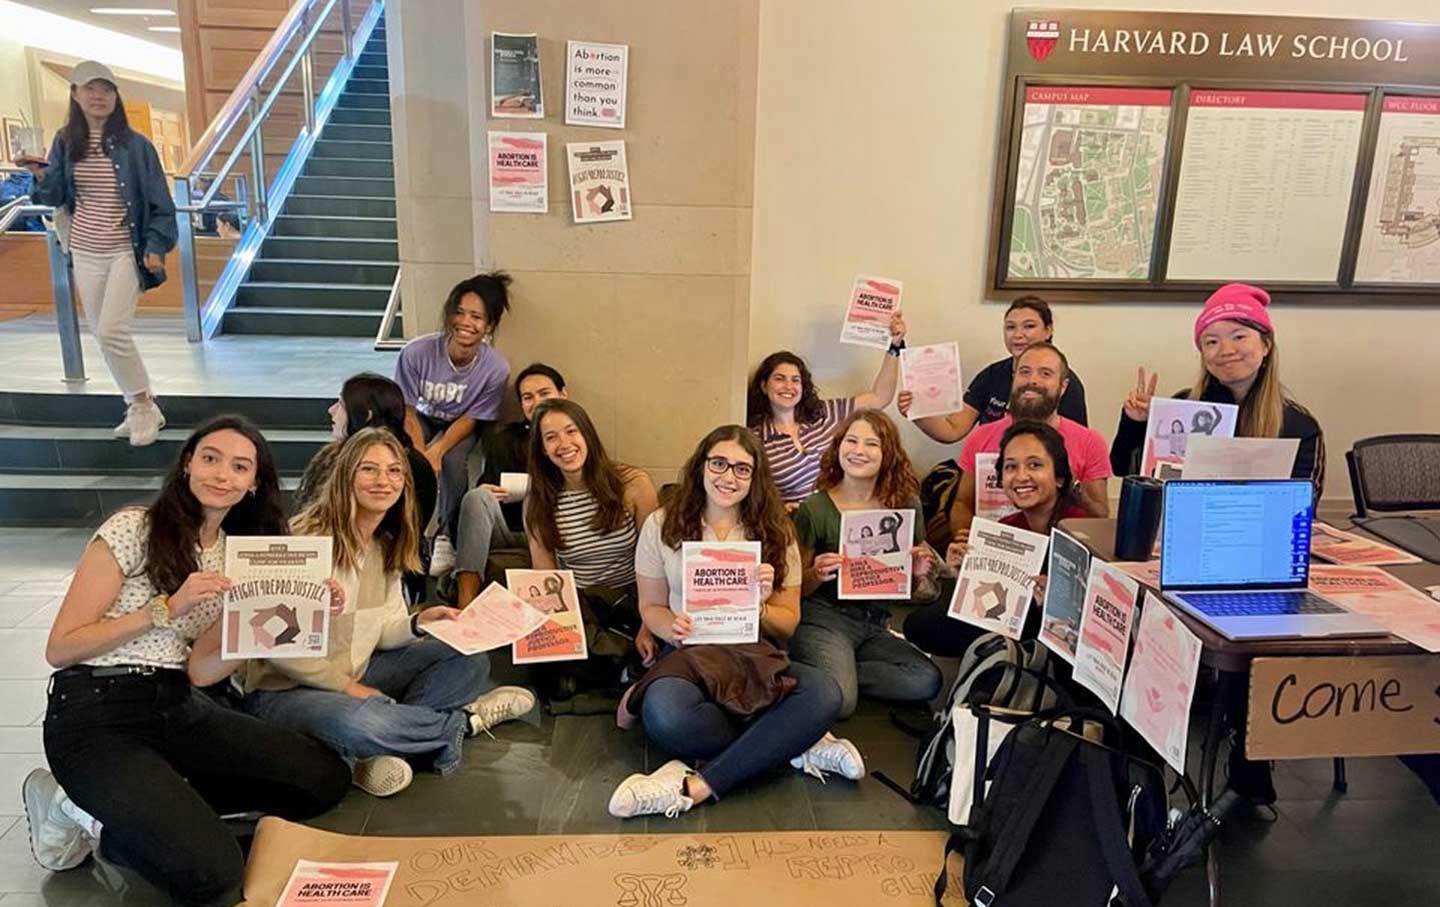 Harvard Law School students gathered signatures to support their petition to create a reproductive justice clinic and hire a full-time faculty member who studies reproductive rights.